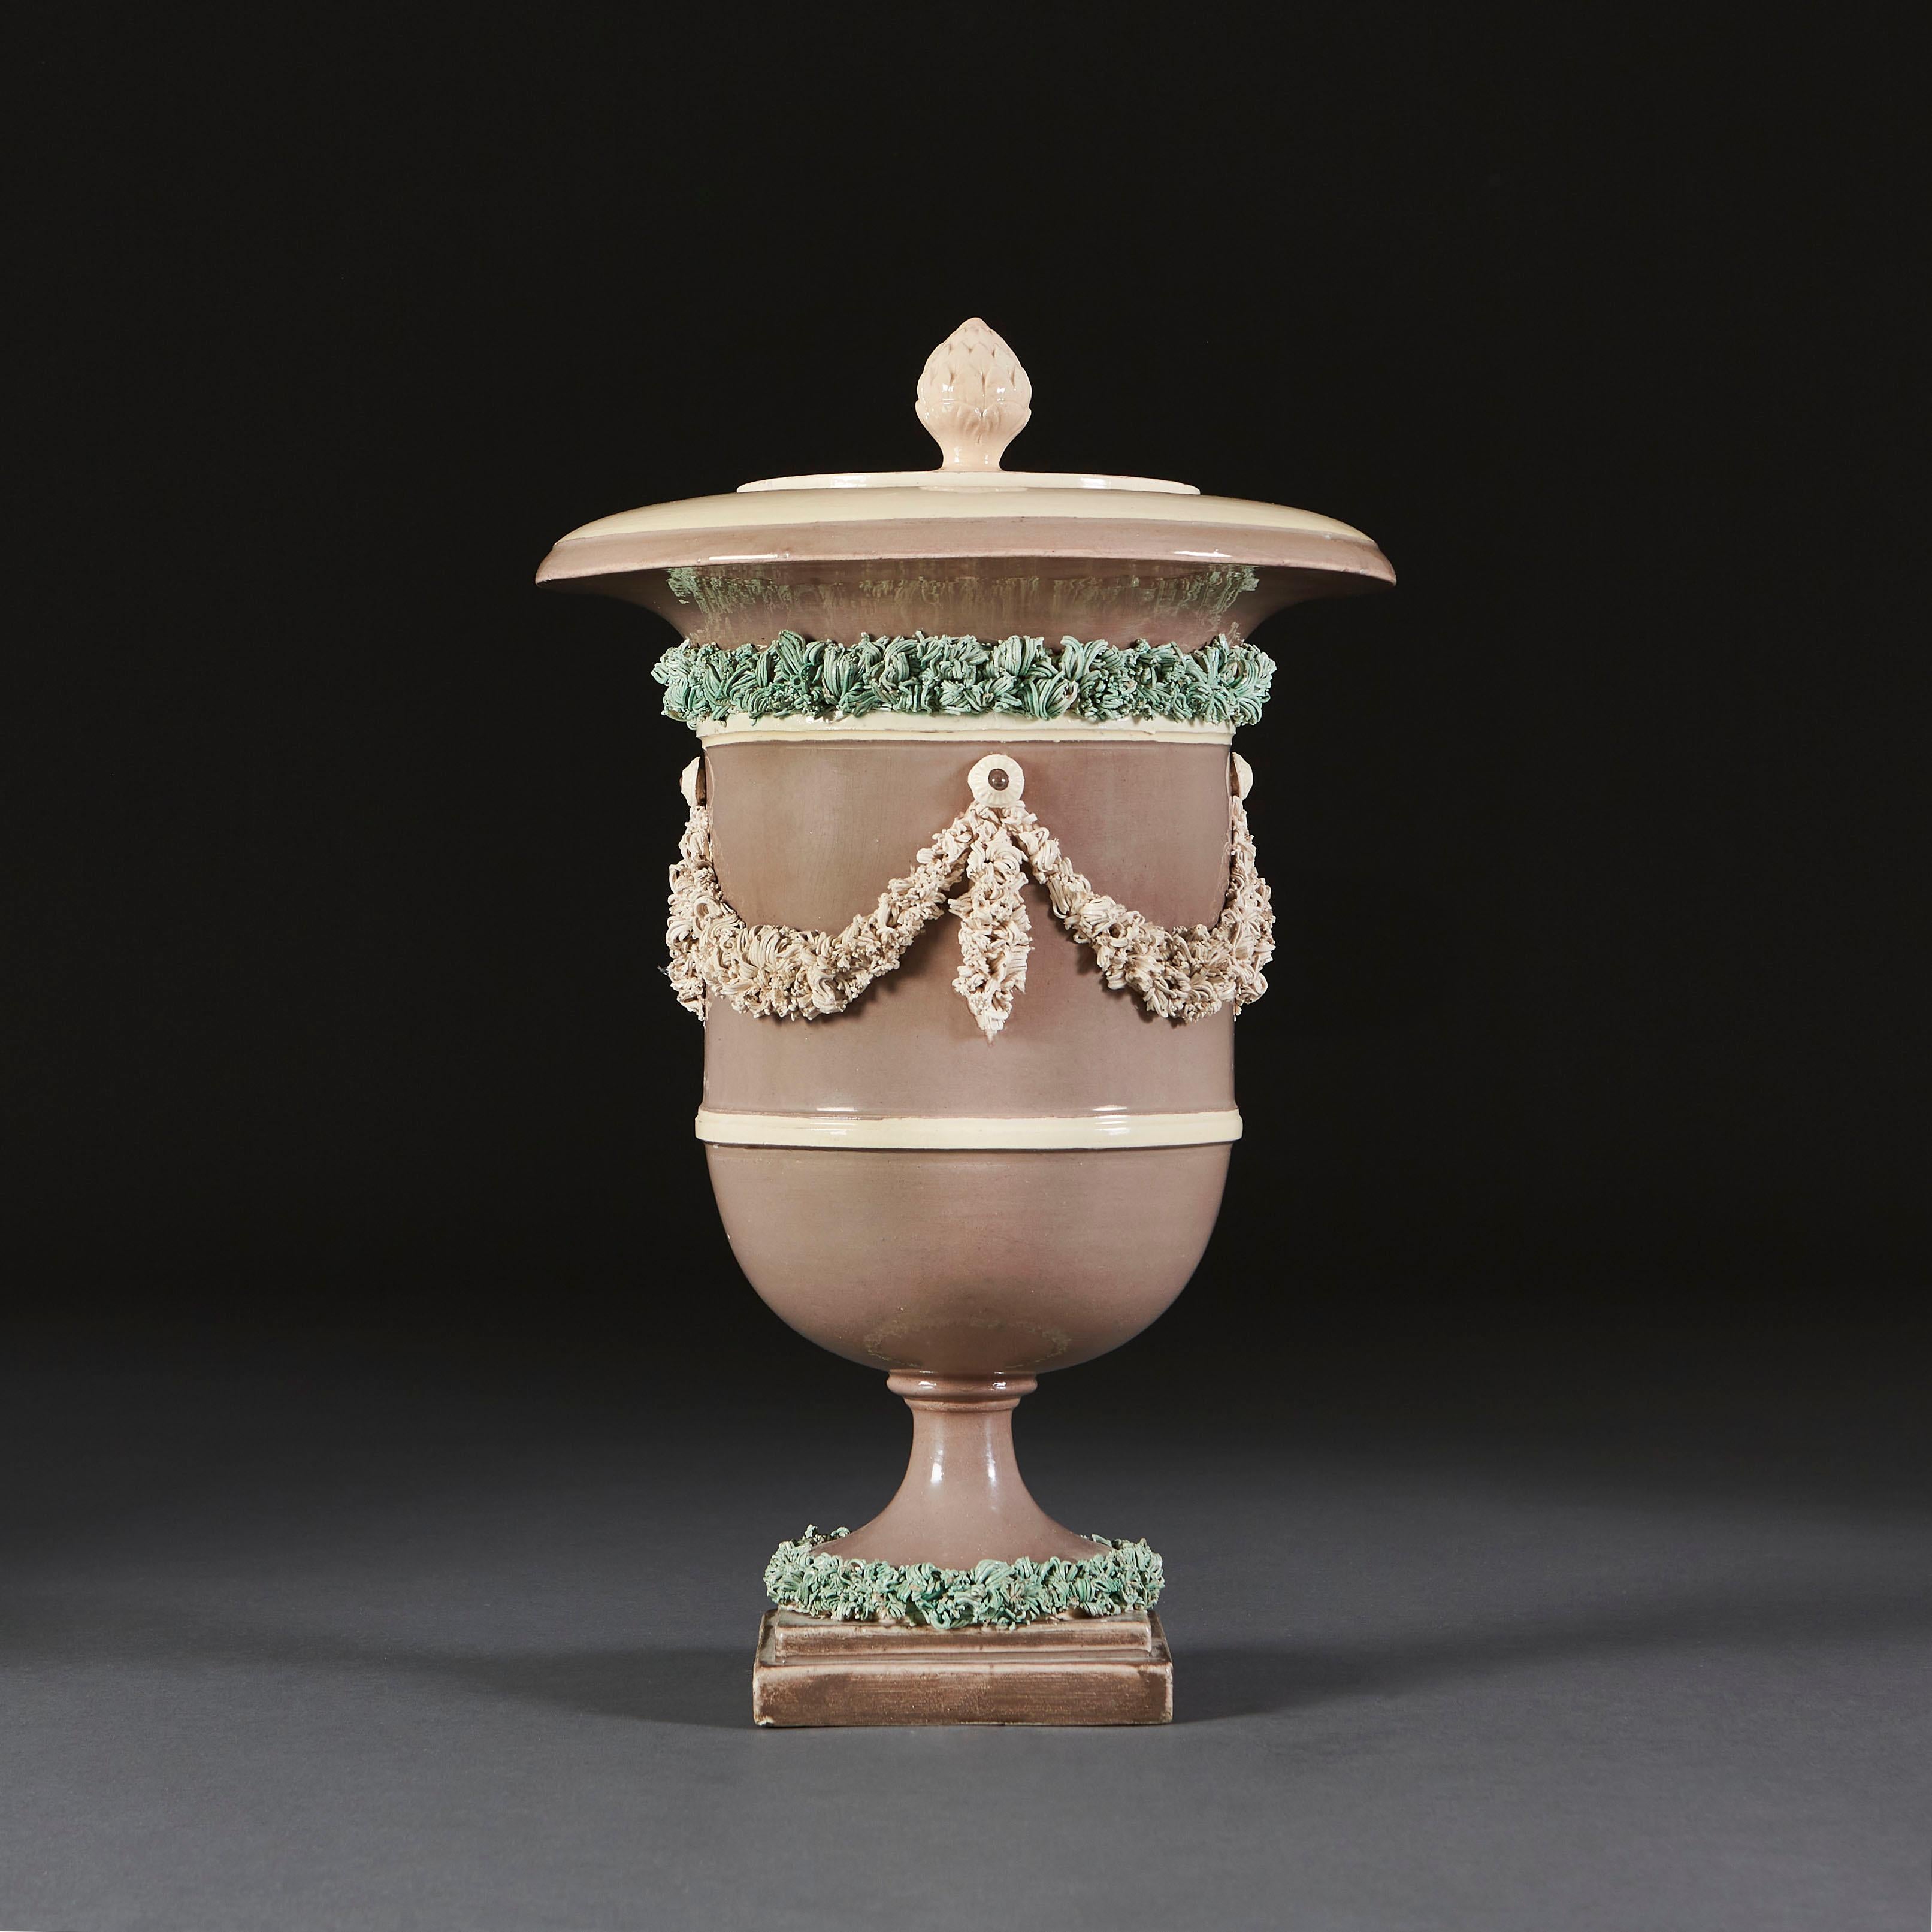 An early nineteenth century neoclassical ice pail modelled in greens and greys with applied decorative swags, removable lid with acorn finial, all supported on a square plinth base.